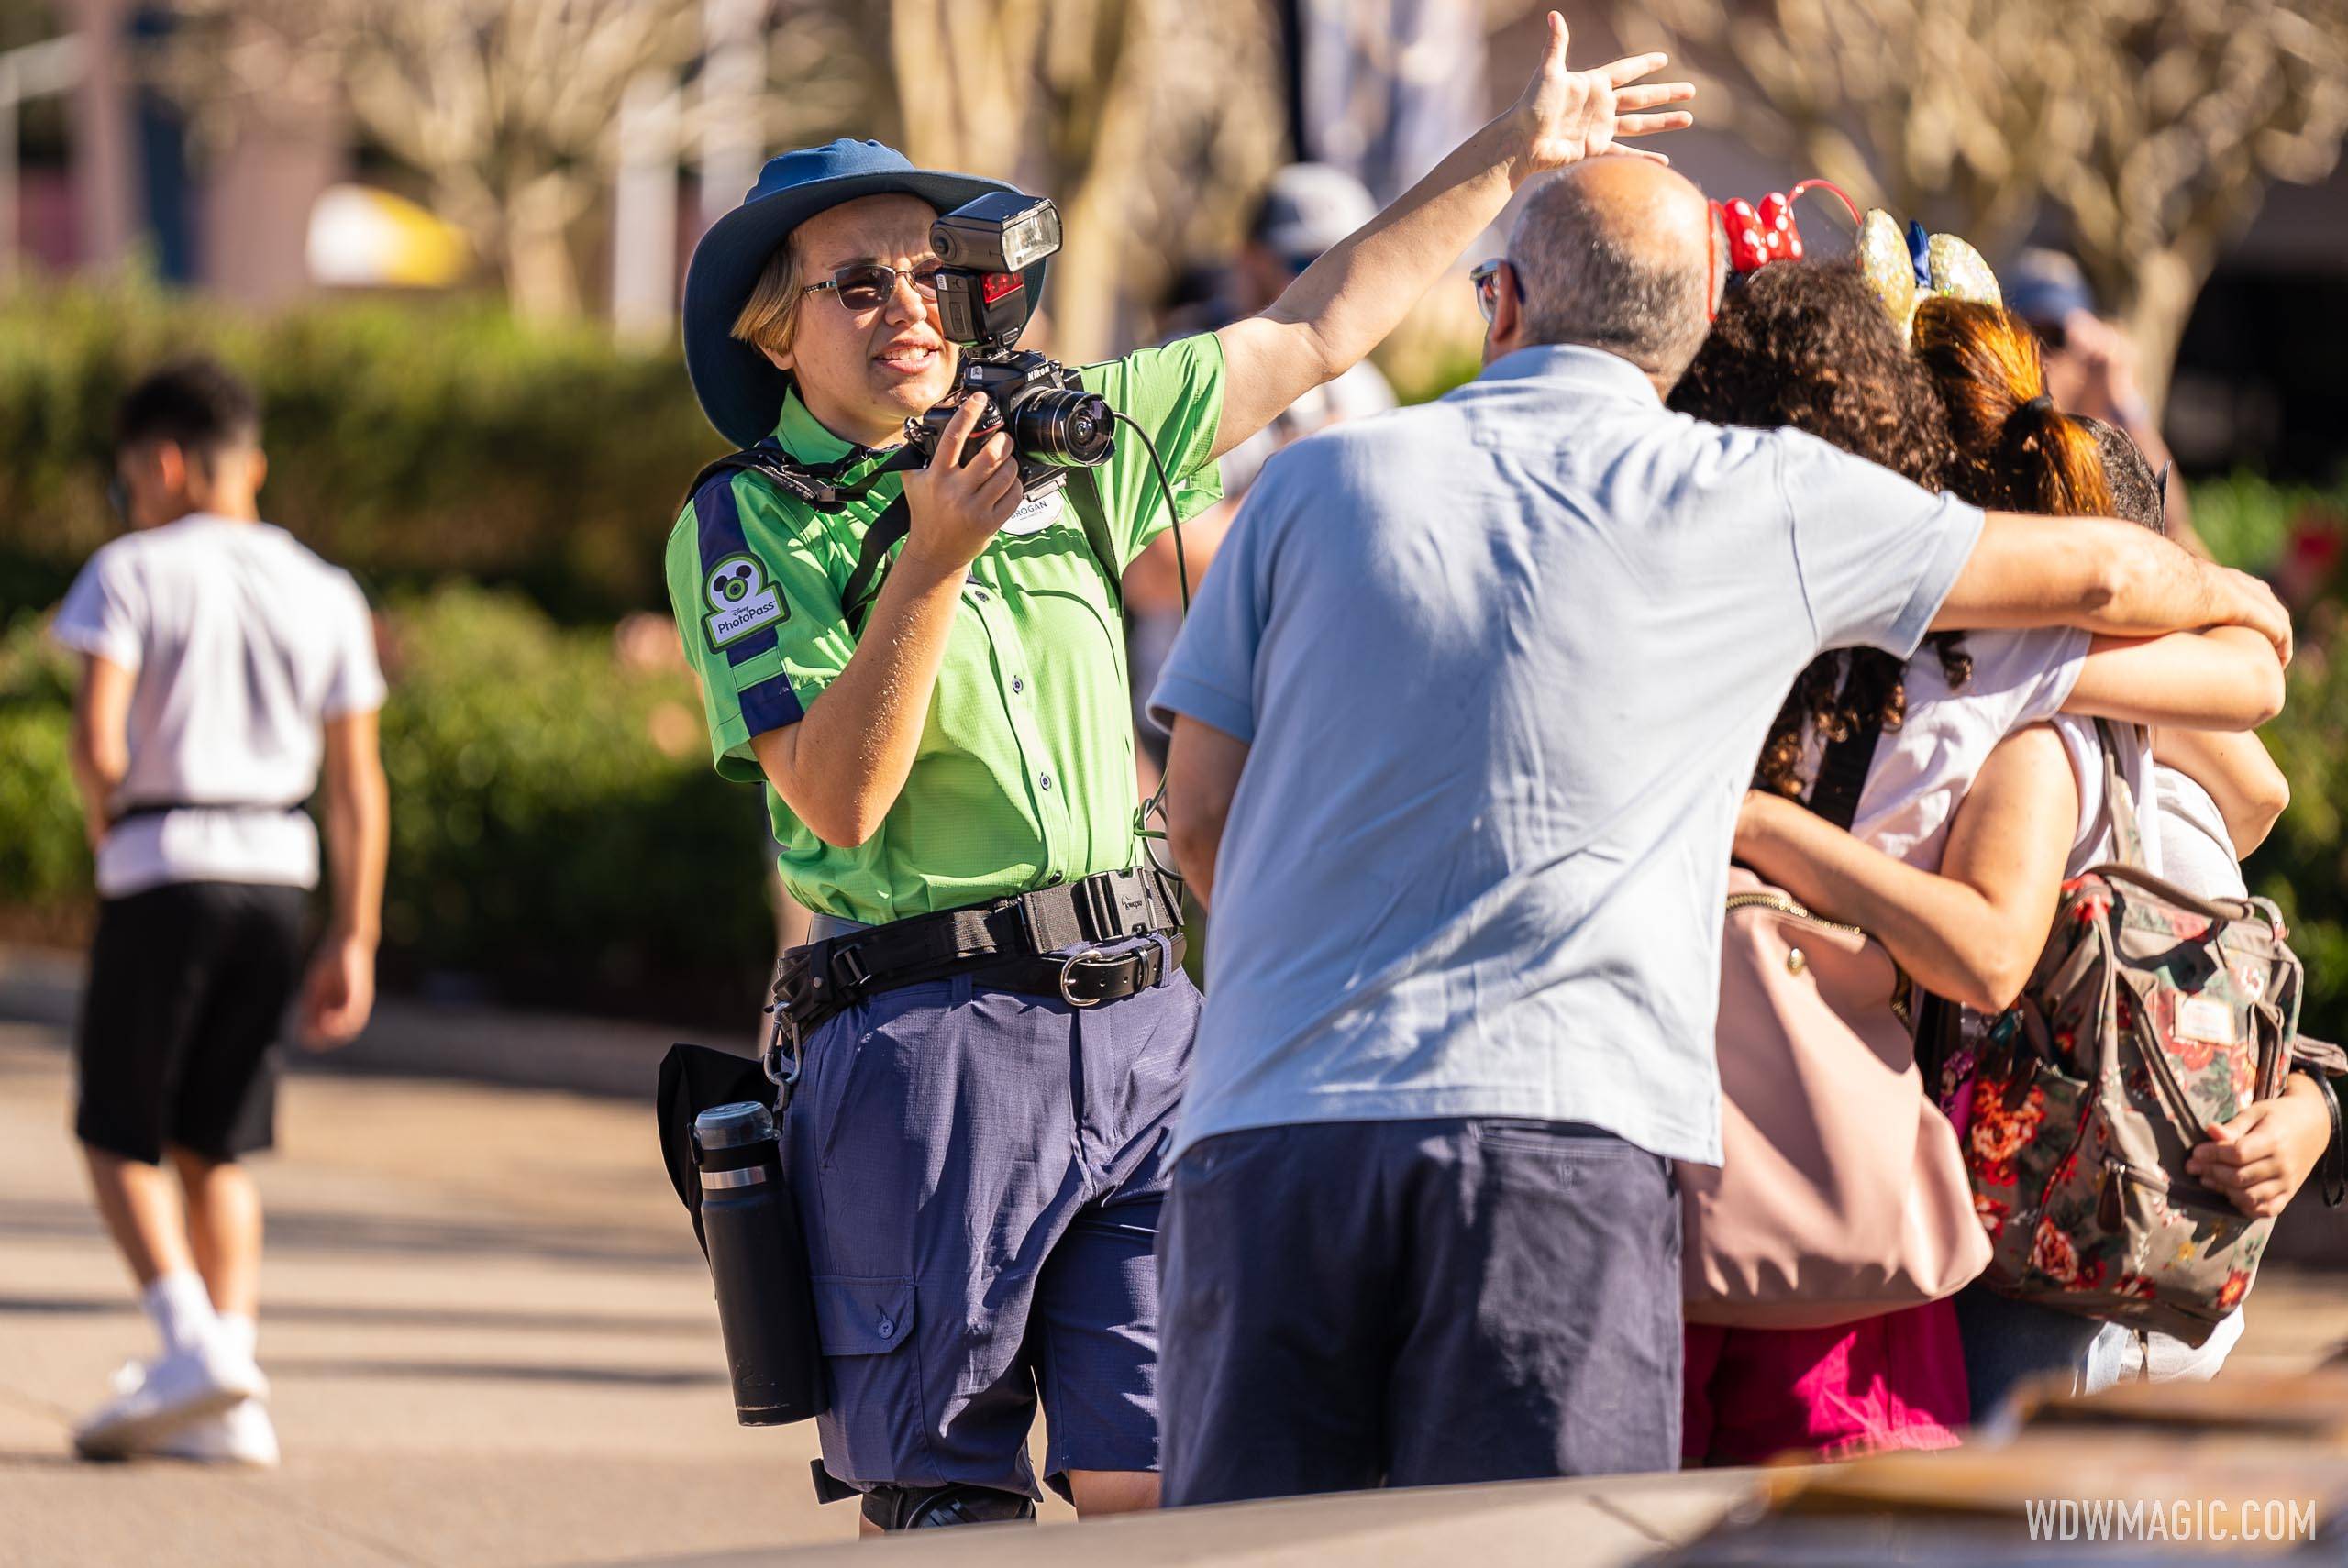 PhotoPass Memory Maker price increase goes into effect at Walt Disney World